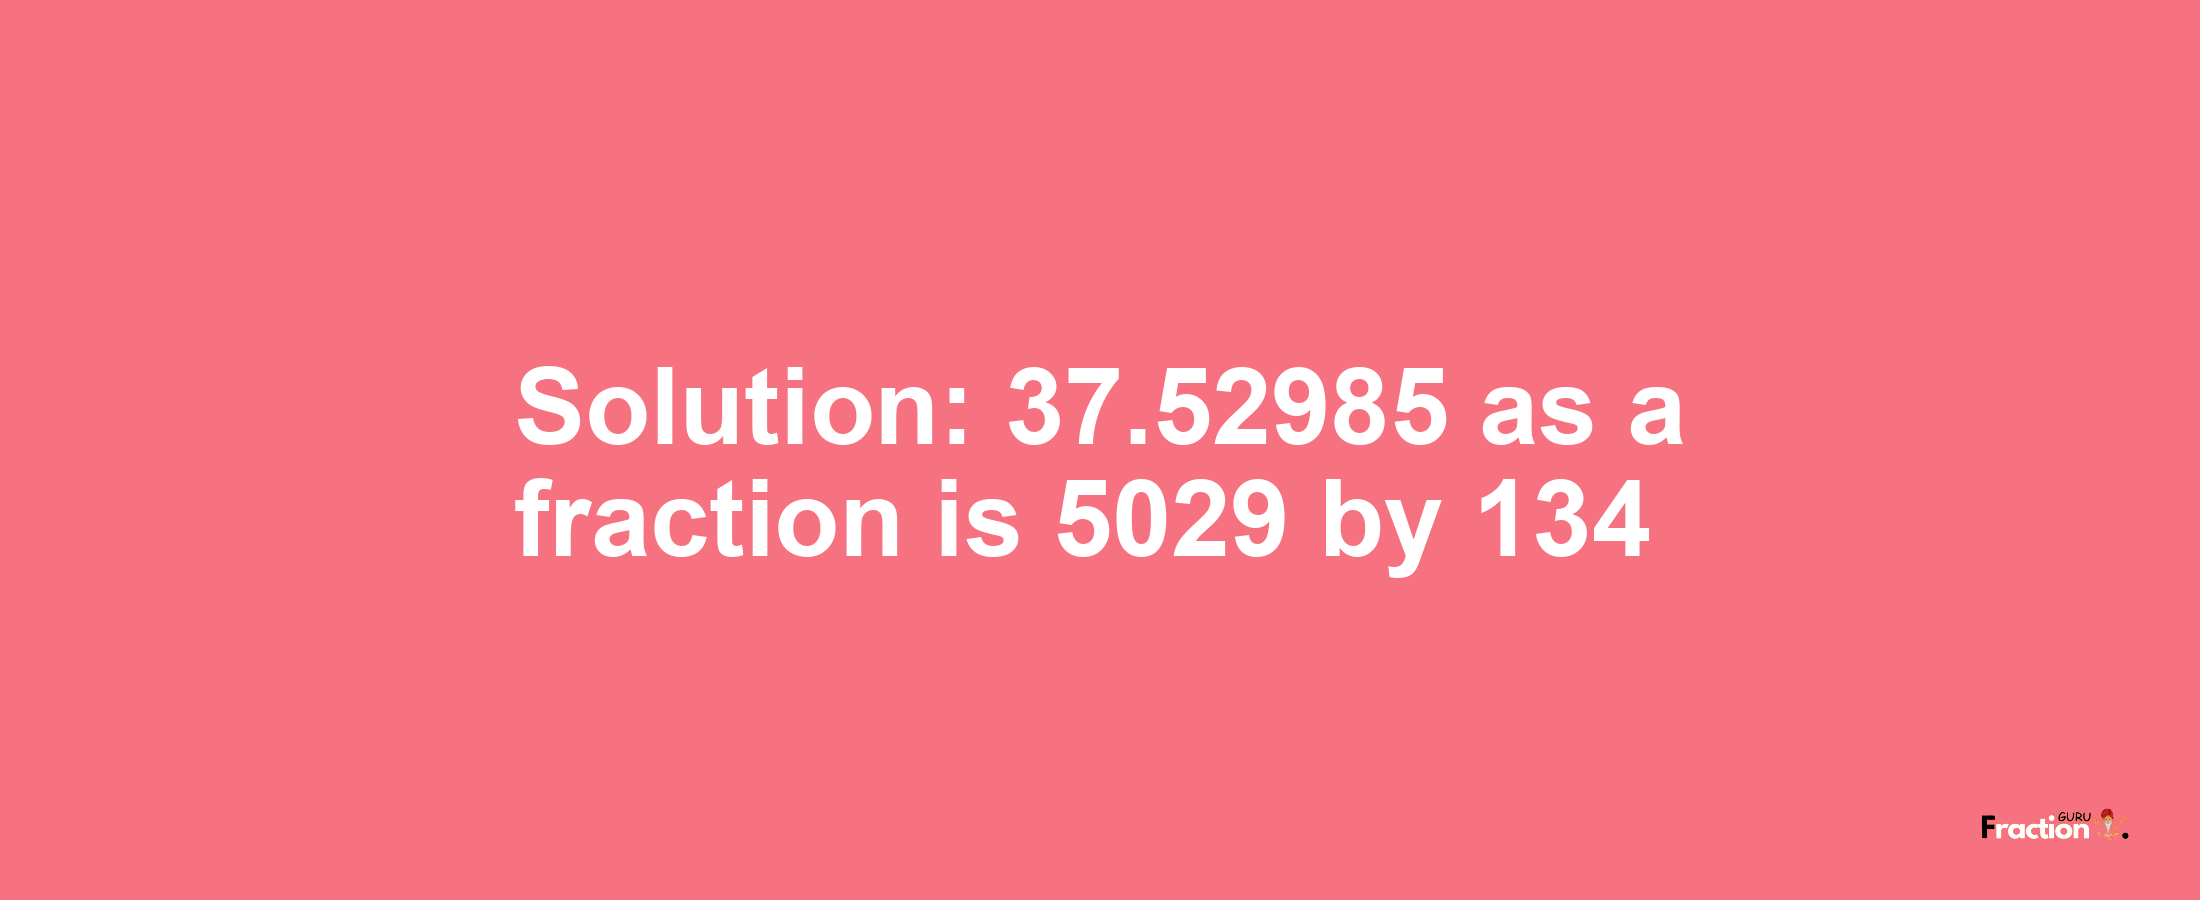 Solution:37.52985 as a fraction is 5029/134